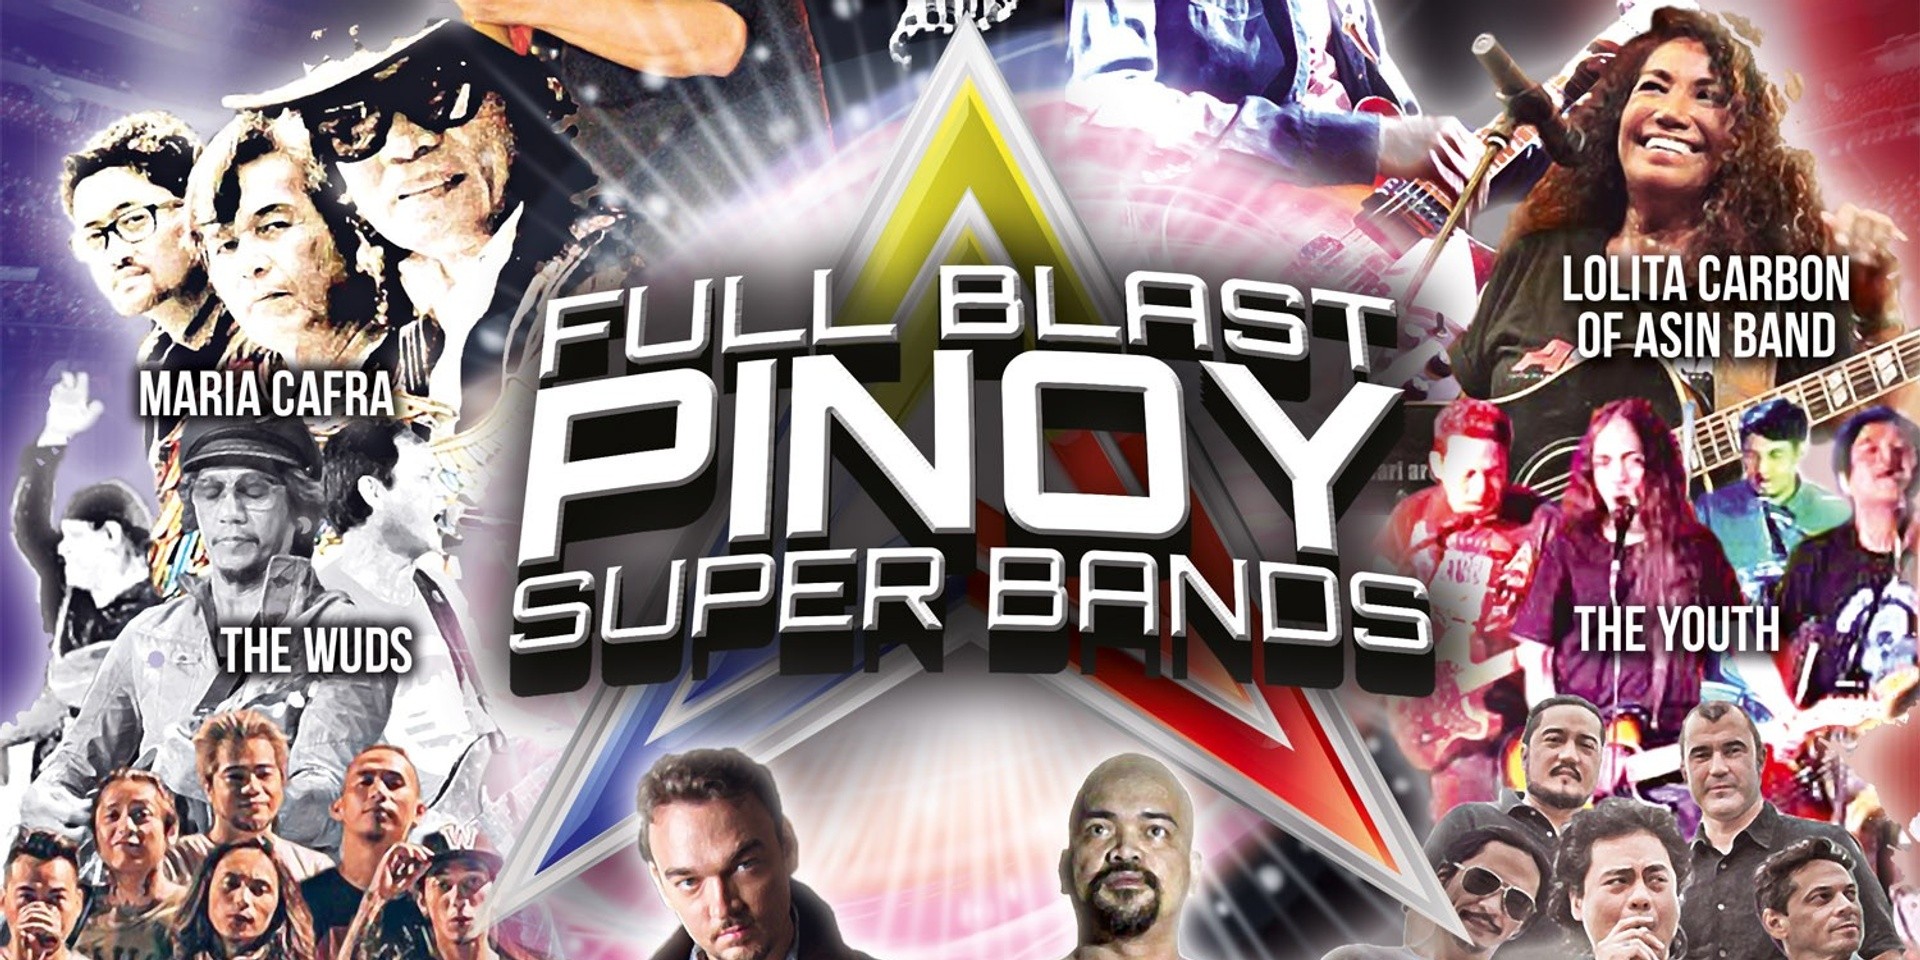 The Youth, The Wuds, Juan dela Cruz band, and more to perform in one-night-only concert